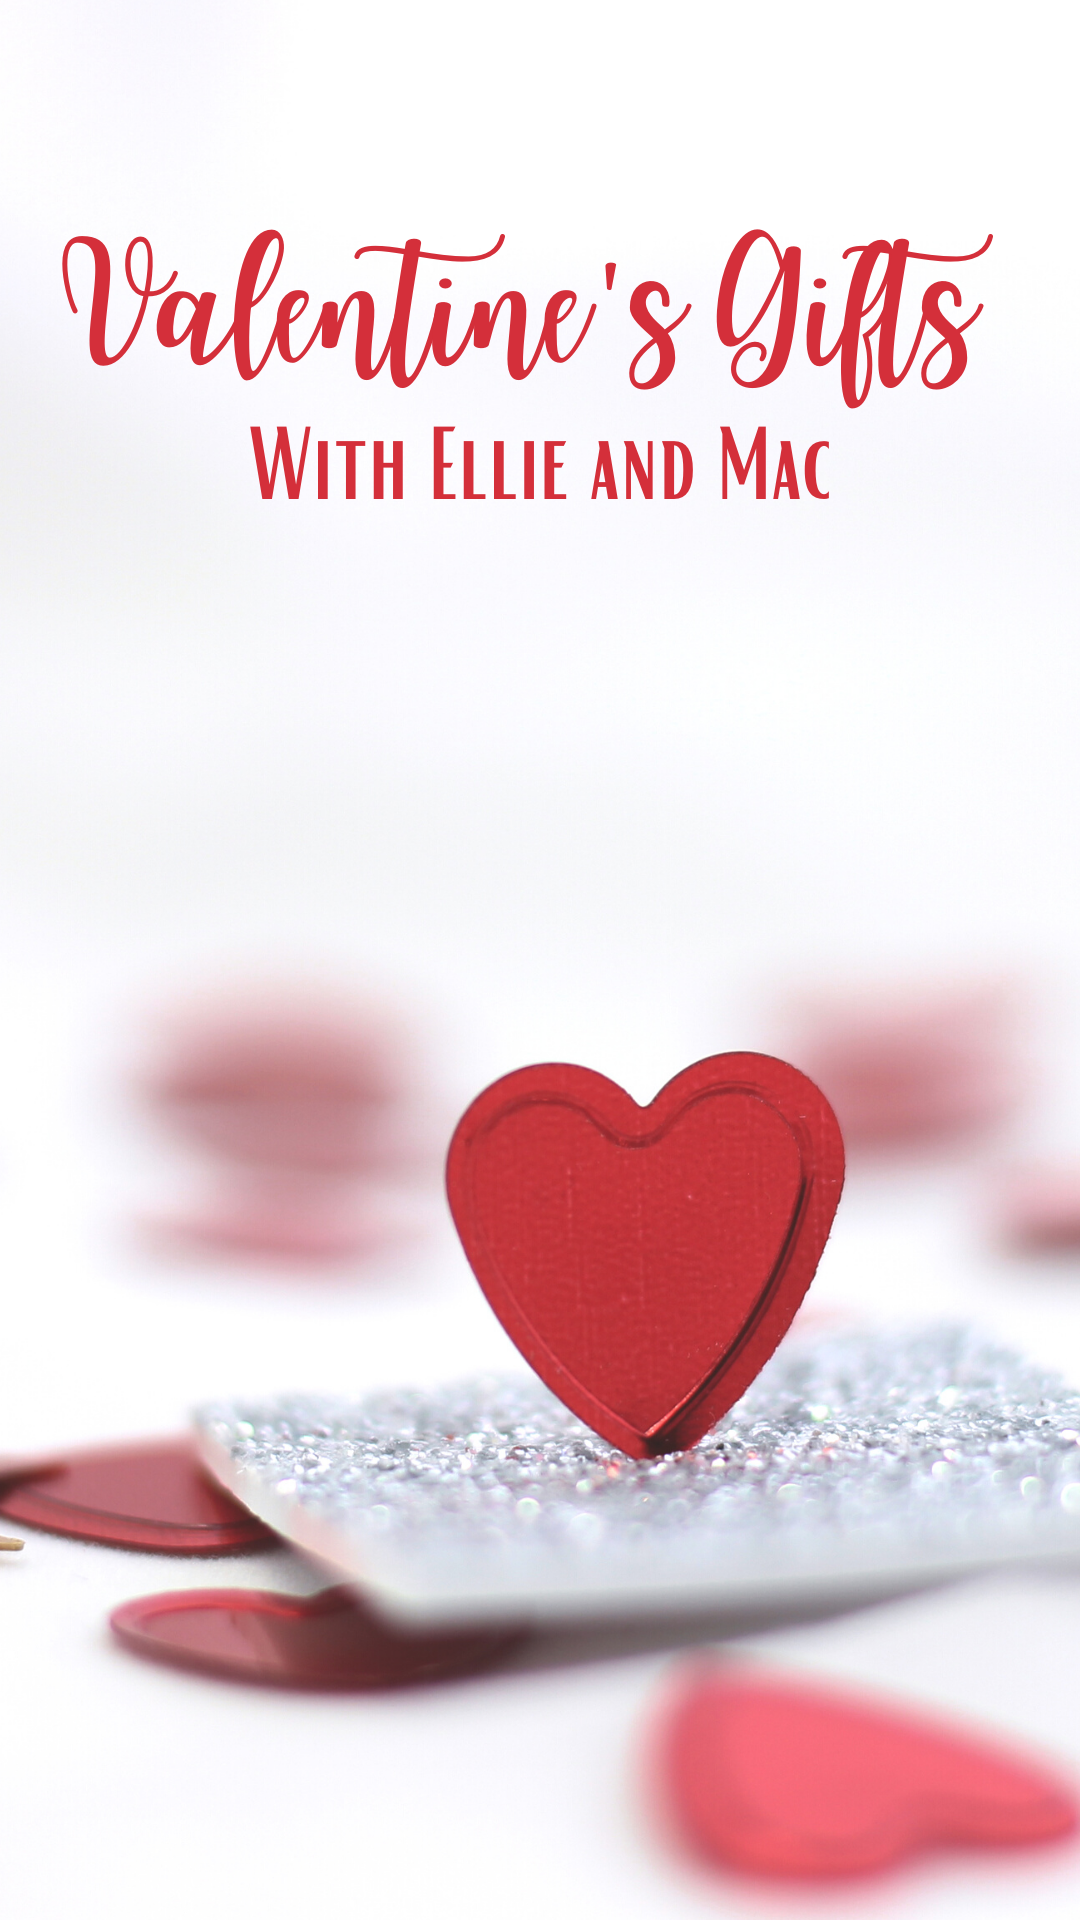 Valentine's Gifts With Ellie and Mac